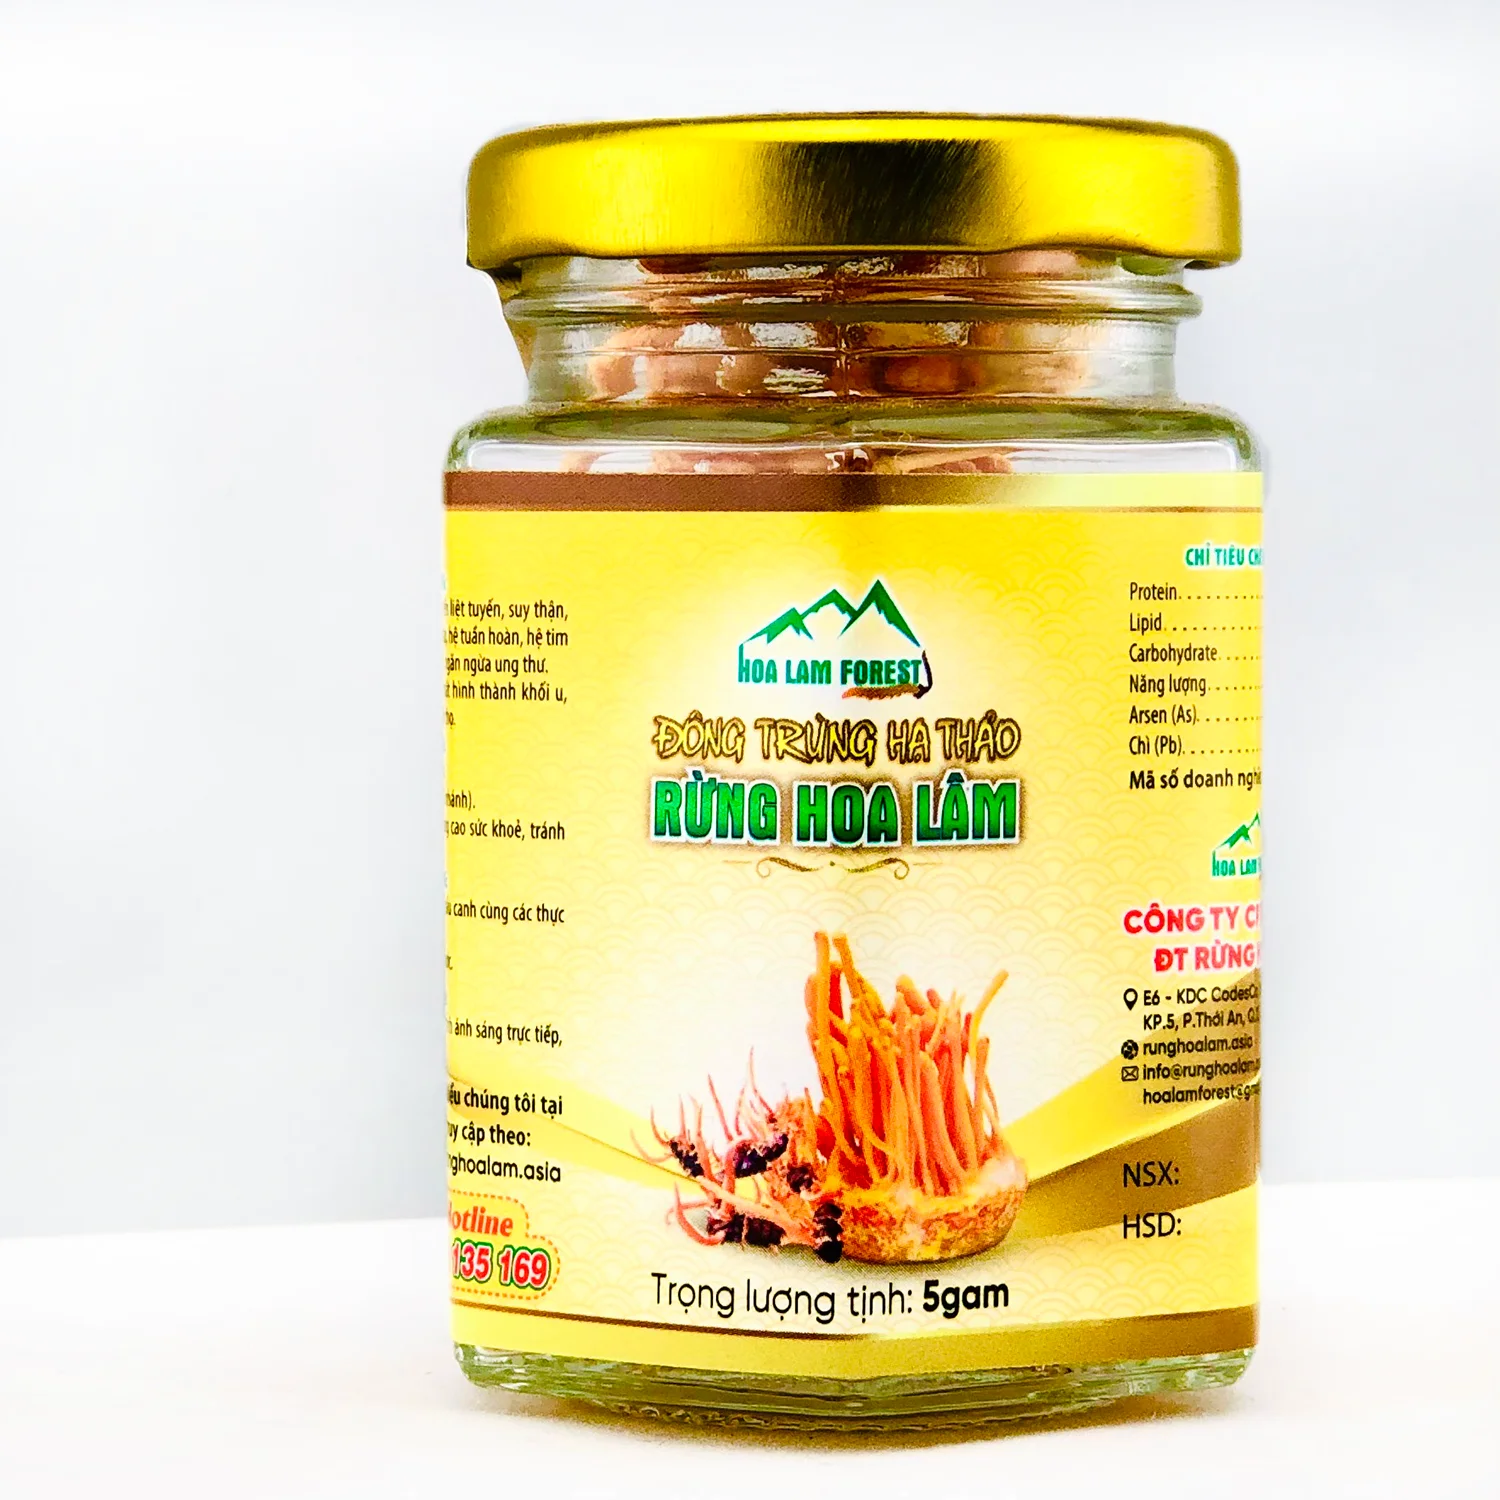 
Cordyceps Healthy Product 100% Natural Herbal High Quality Product Good For Health Providing Energy 